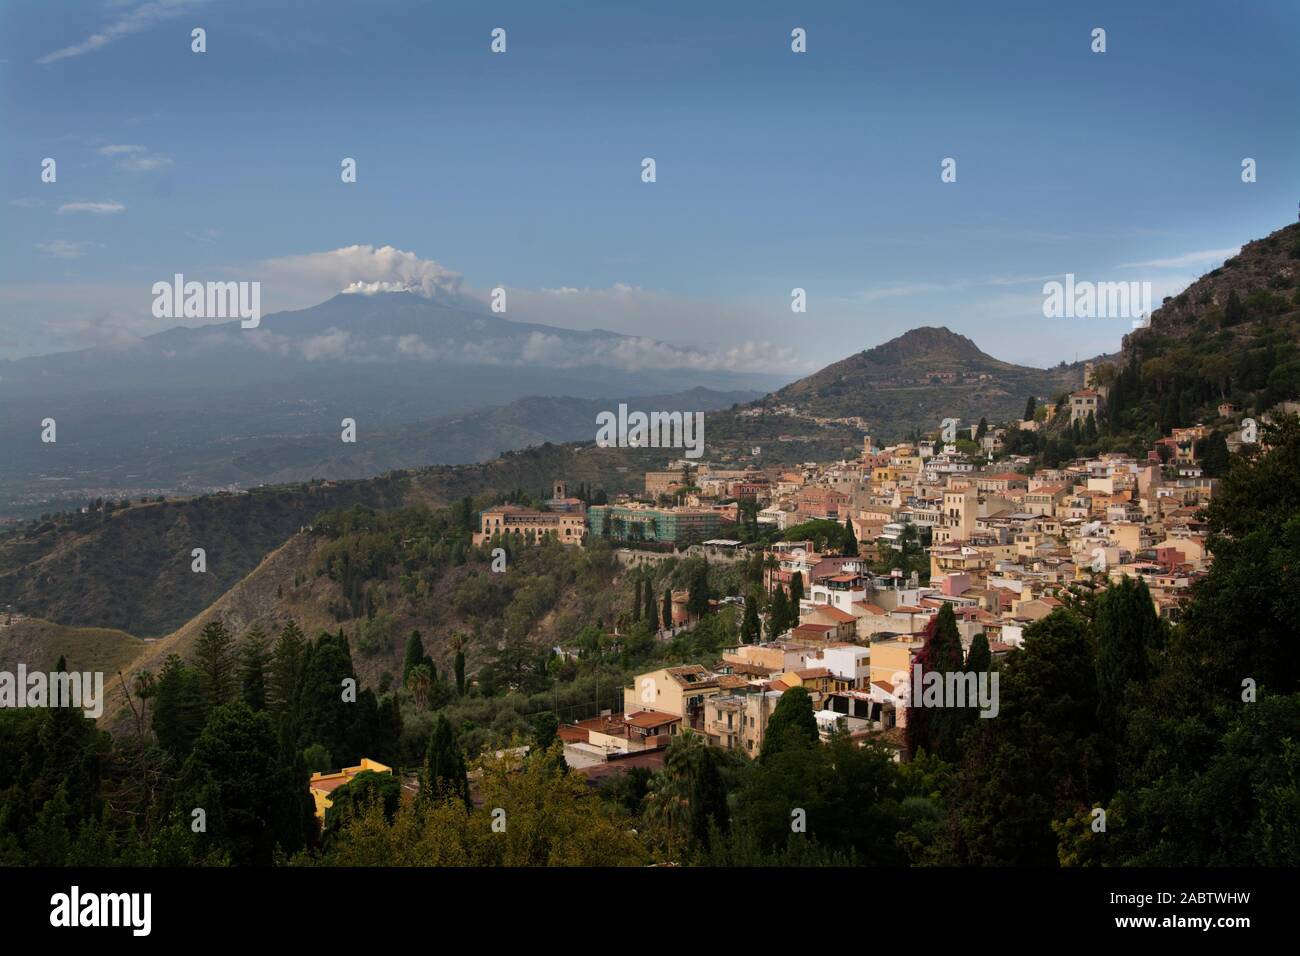 Italy, Sicily, Taormina, town with Mount Etna and steam escaping from crater Stock Photo